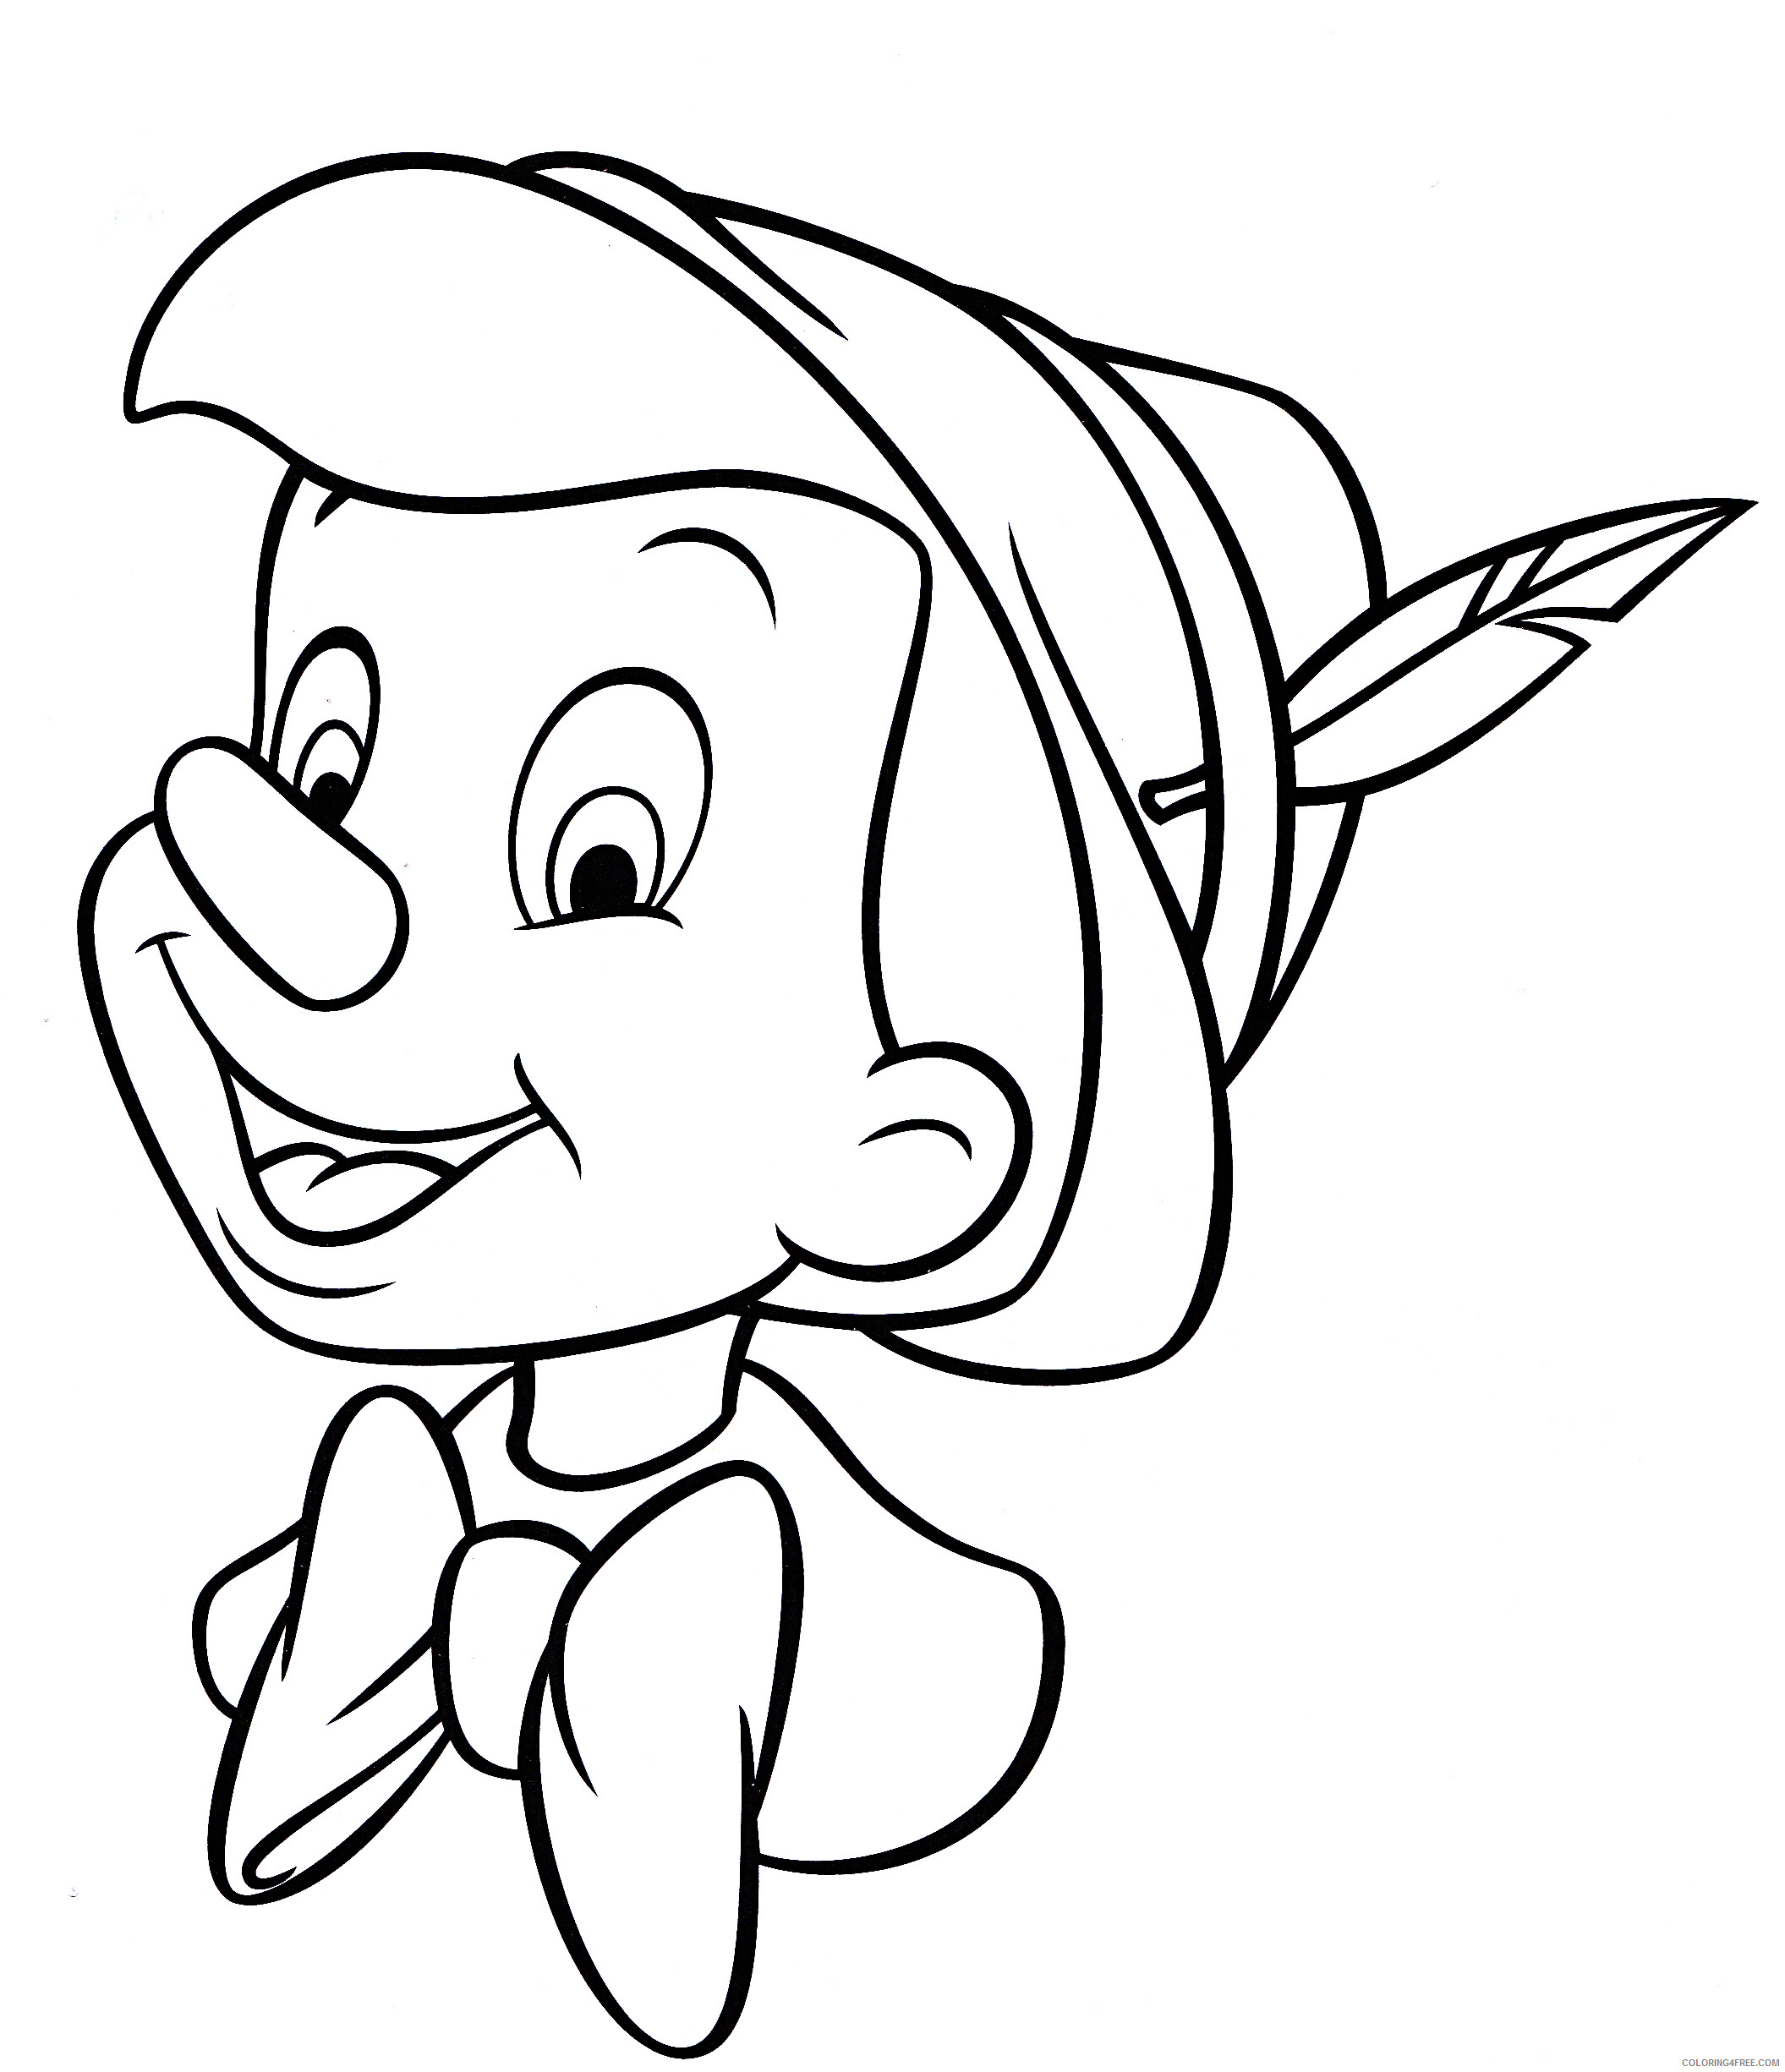 Pinocchio Coloring Pages TV Film Disney Pinocchio Printable 2020 06314 Coloring4free